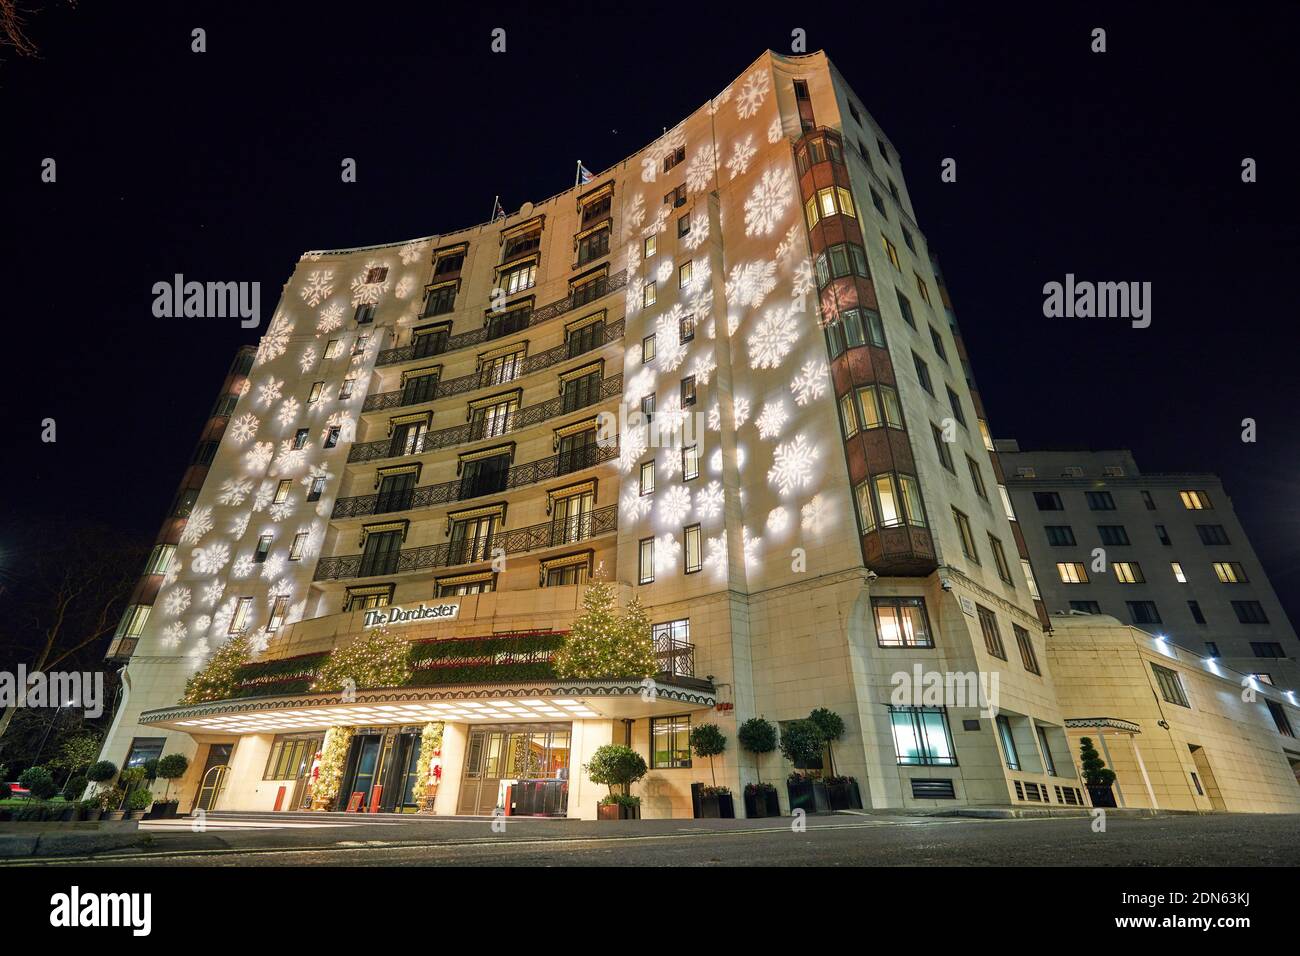 London, UK. - 17 Dec 2020: The Dorchester Hotel on Park Lane, projected with festive lights for the Christmas 2020 season. Stock Photo